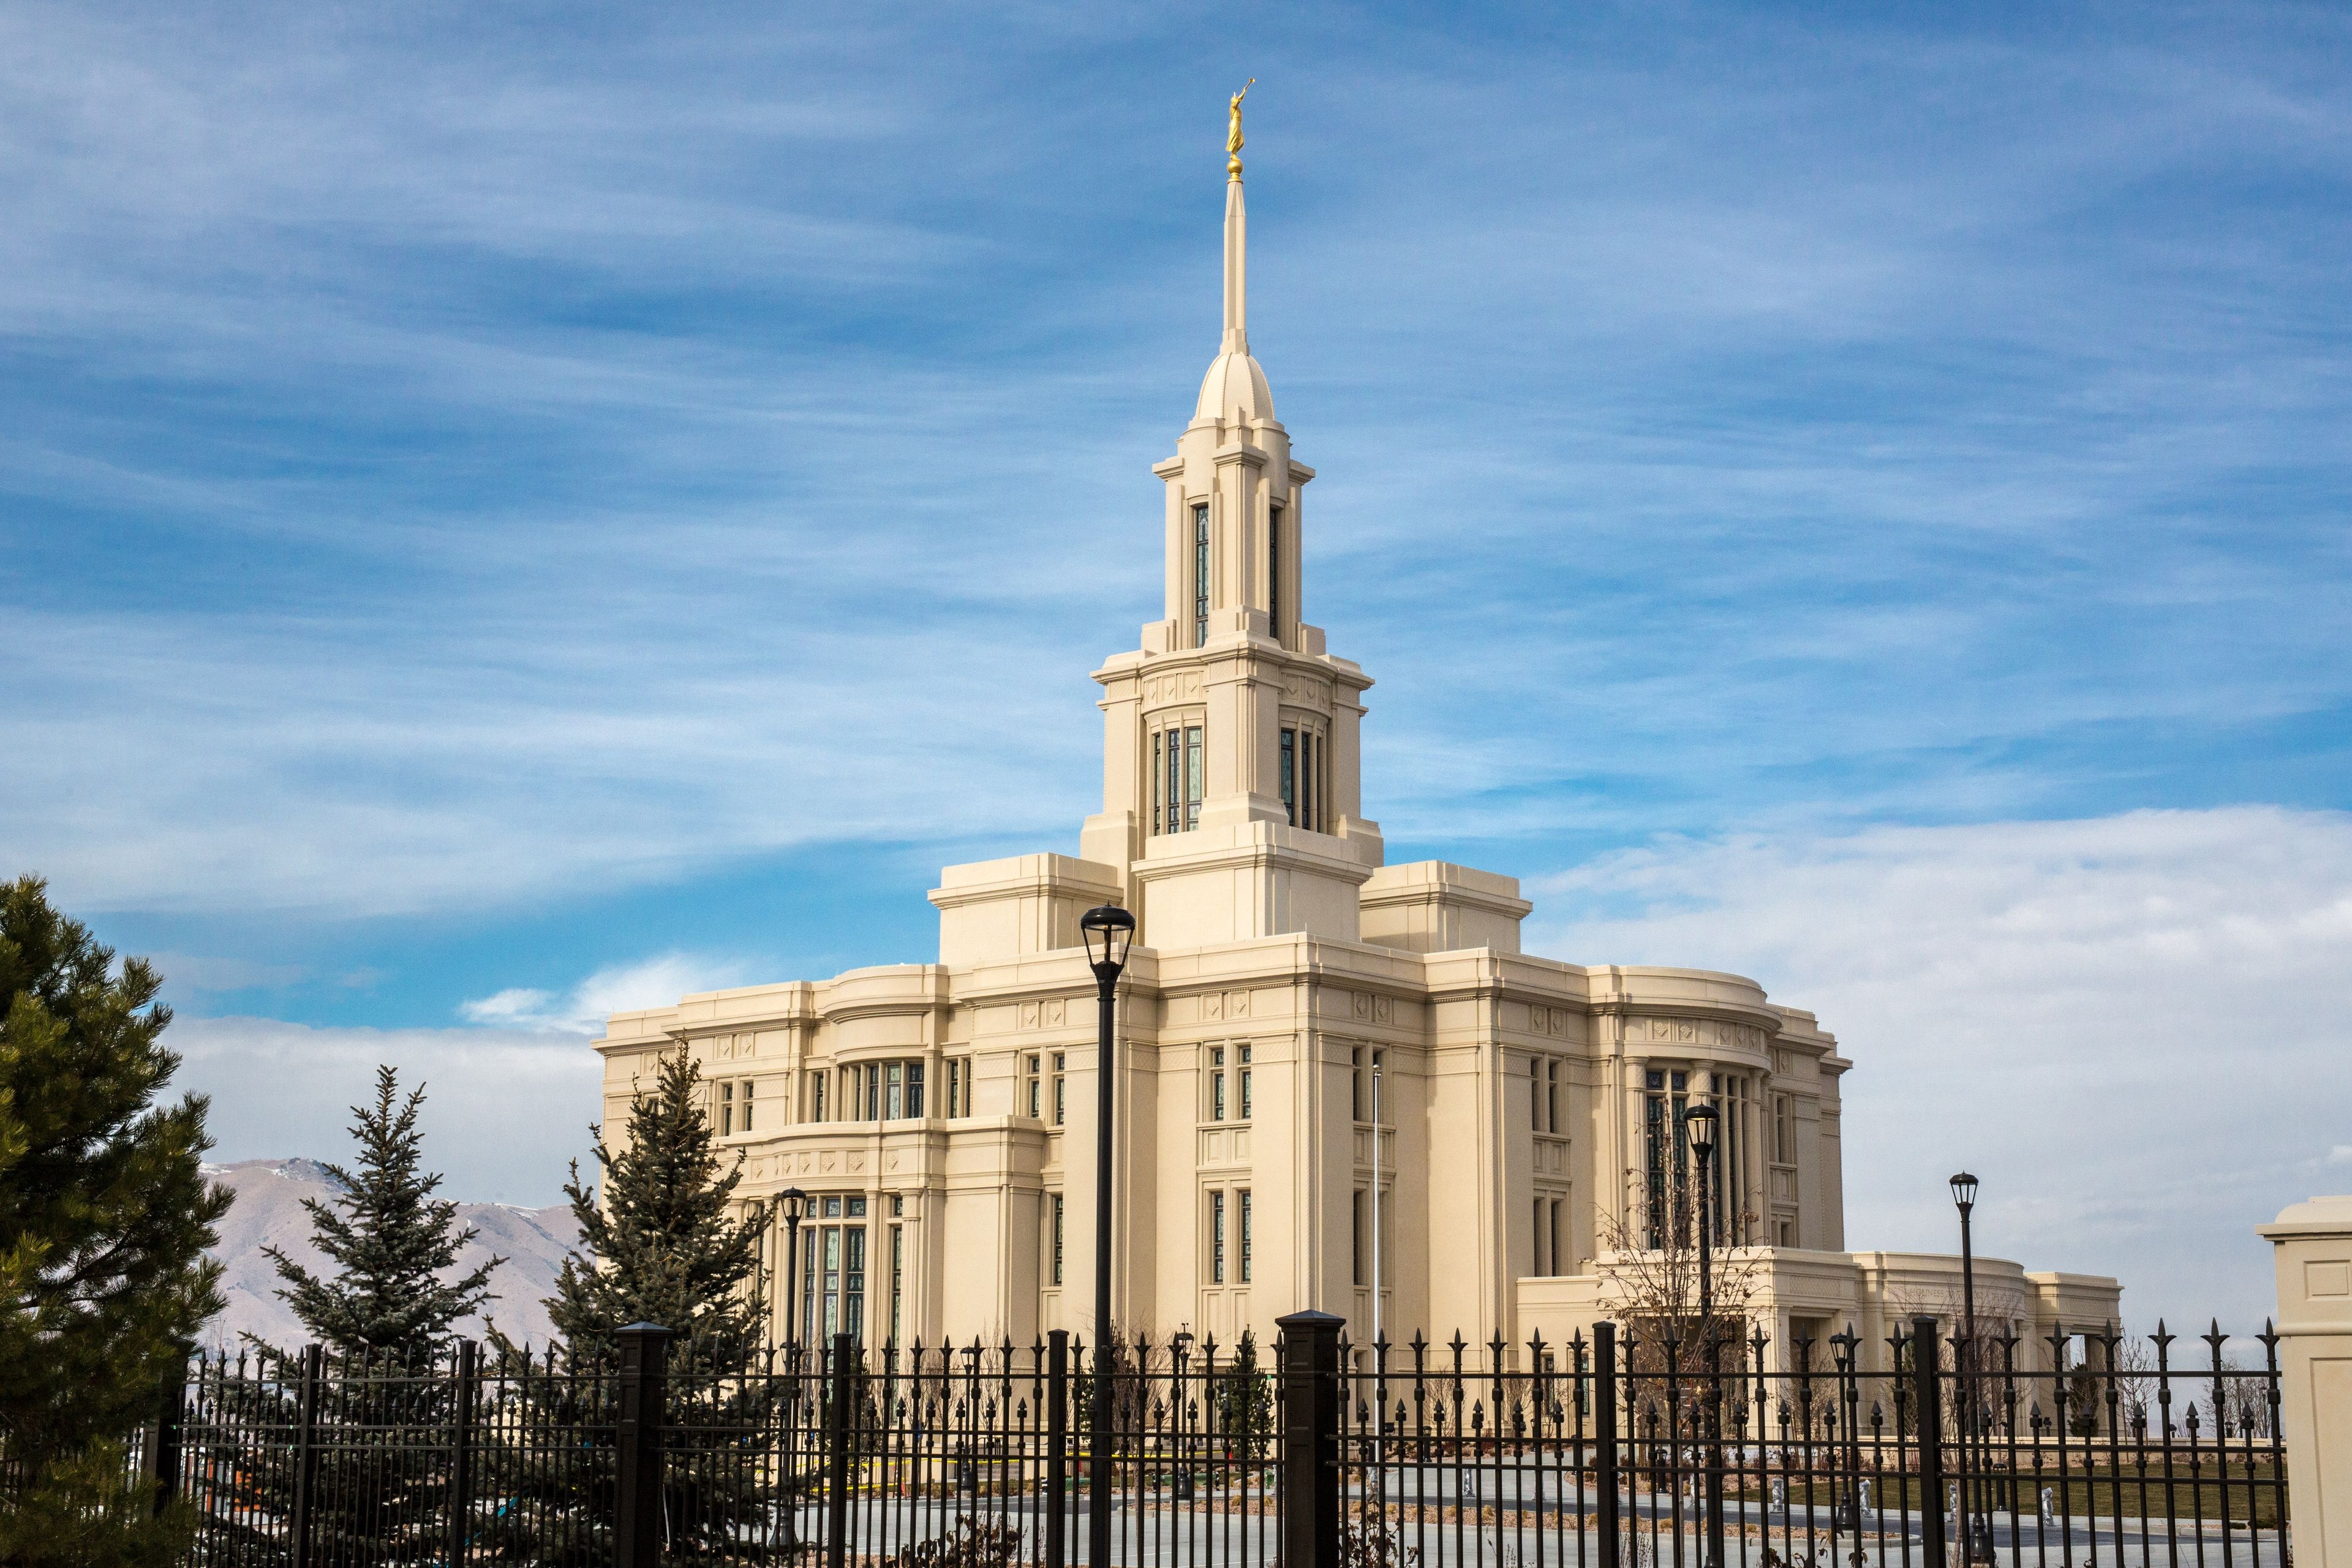 An angle view of the Payson Utah Temple during the day.